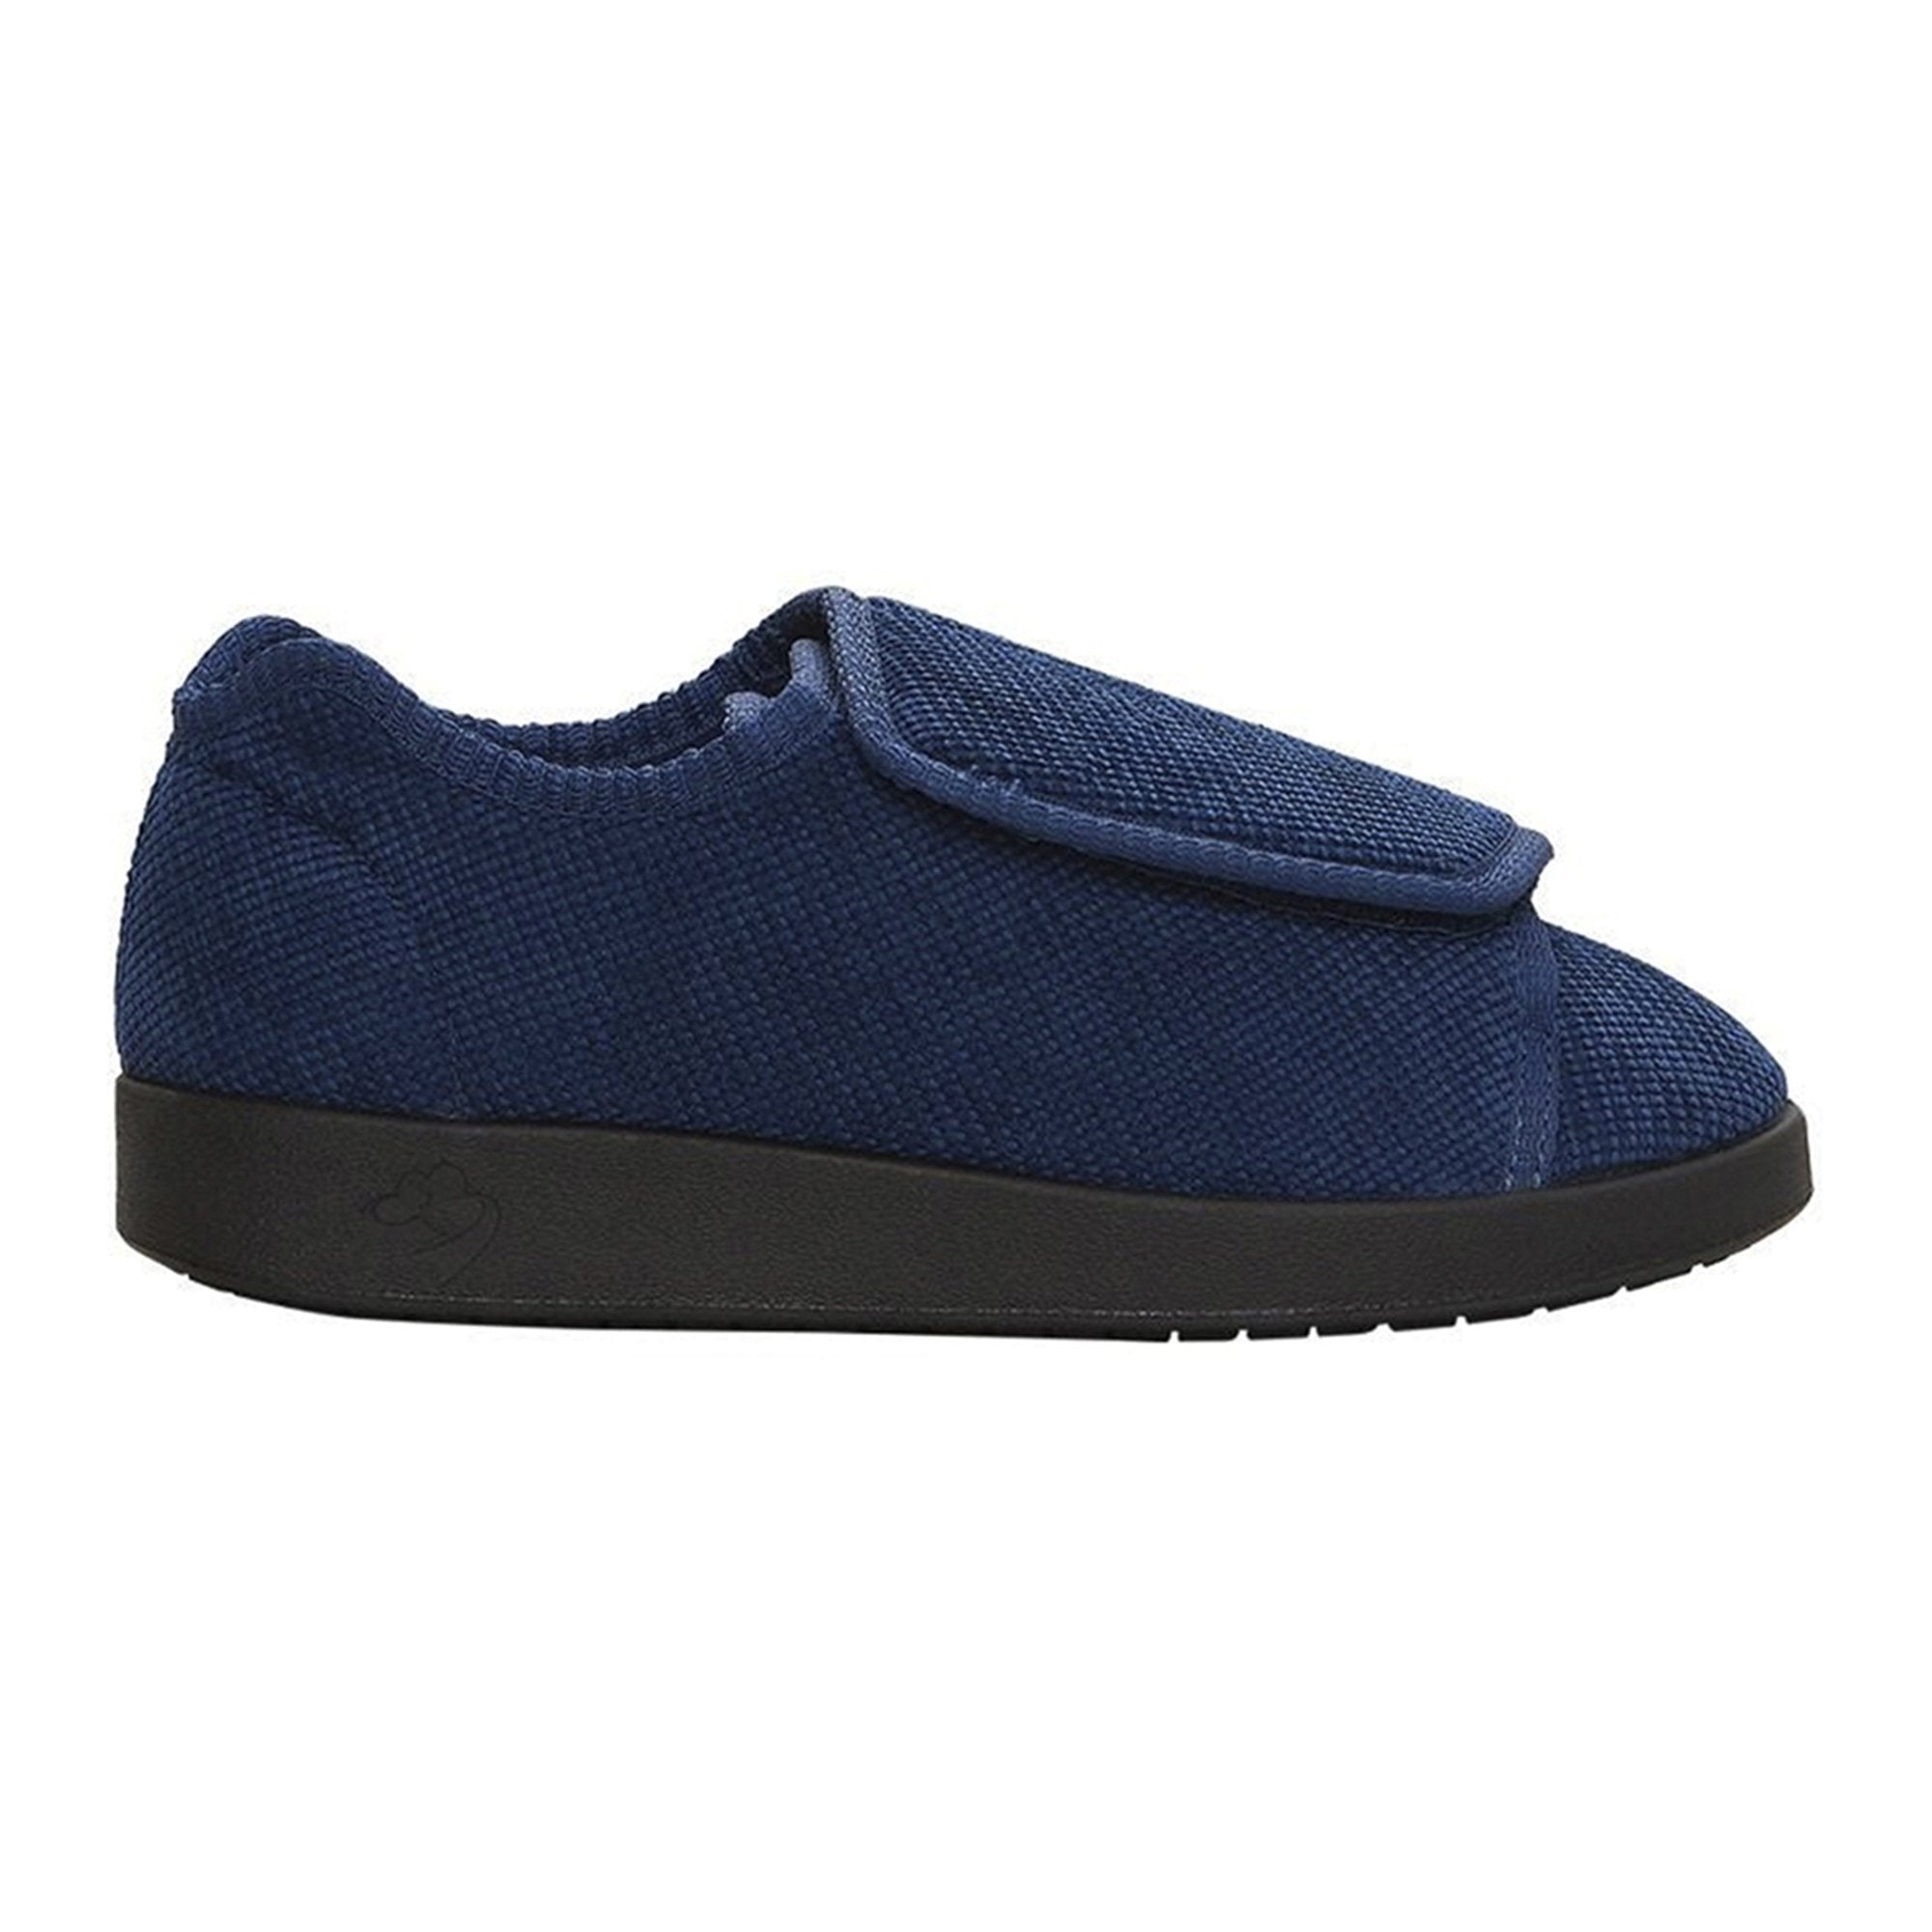 Slippers Silverts® Size 8 / 2X-Wide Navy Blue Easy Closure